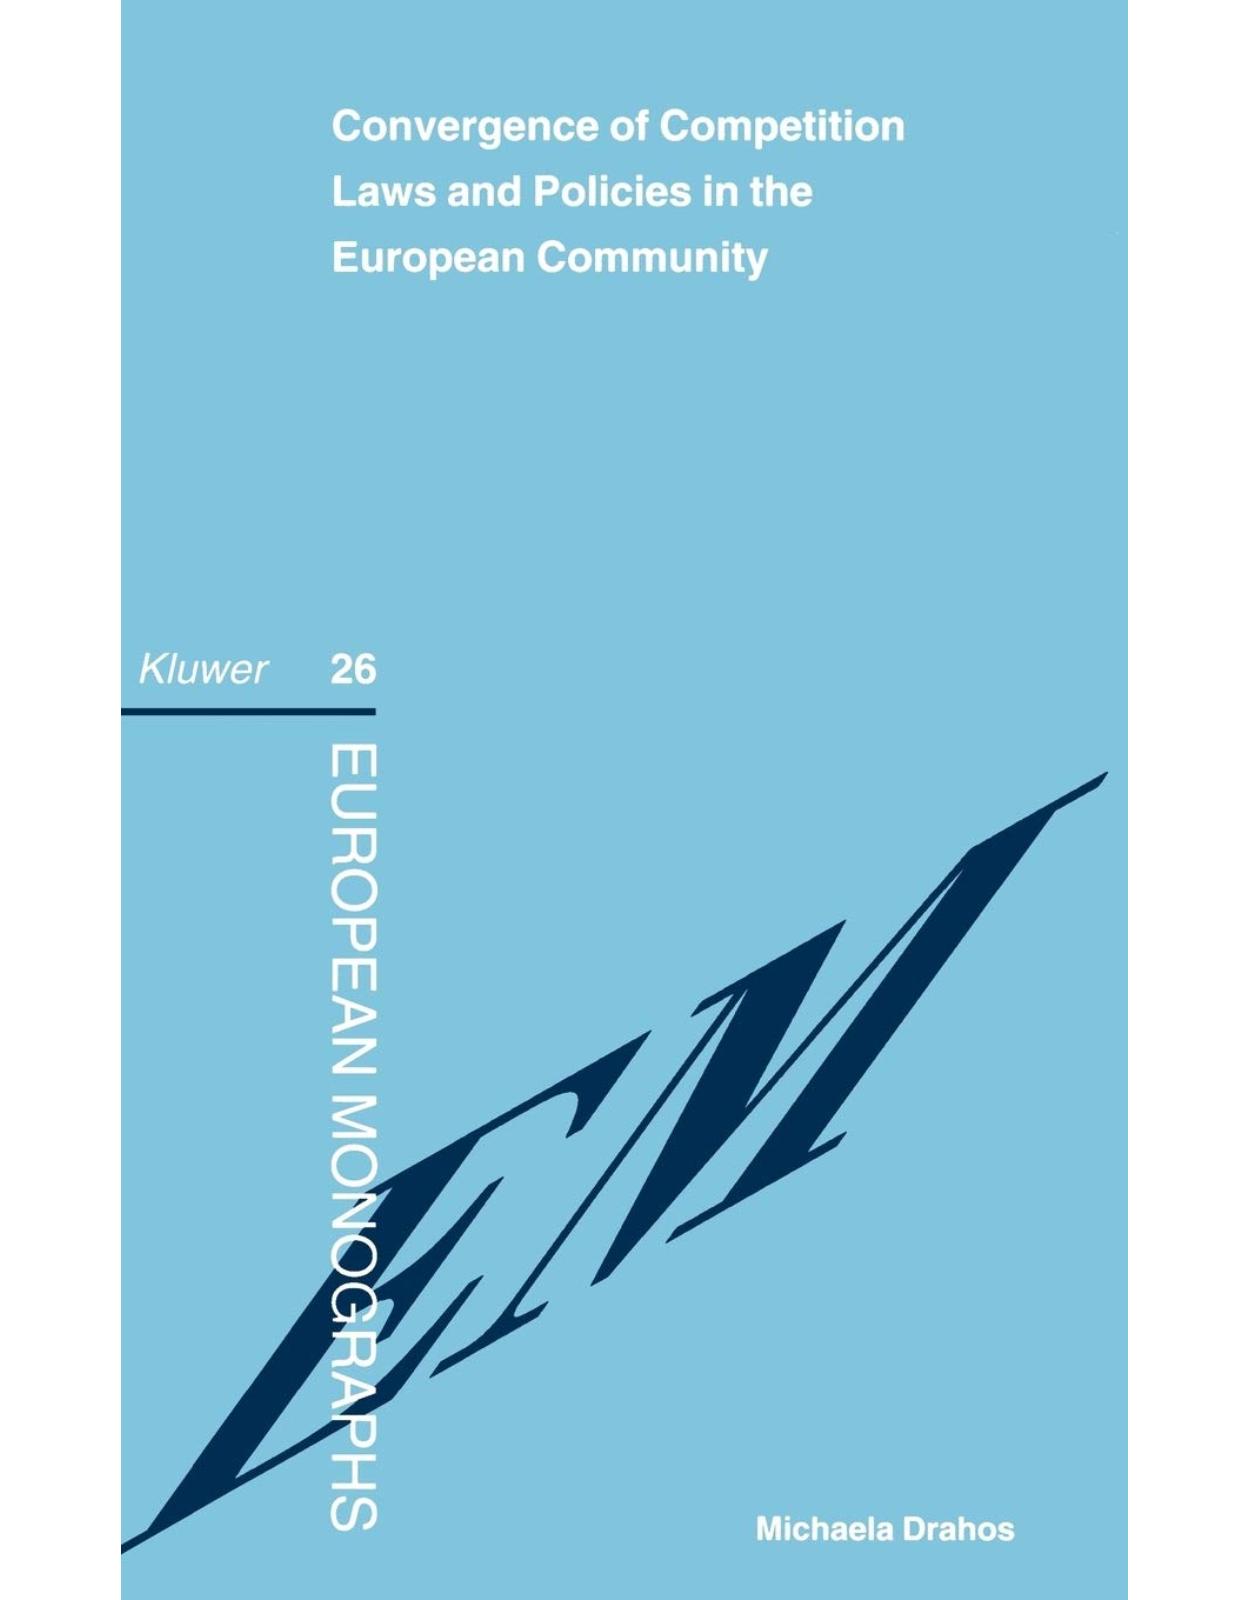 Convergence of Competition Laws and Policies in the European Community